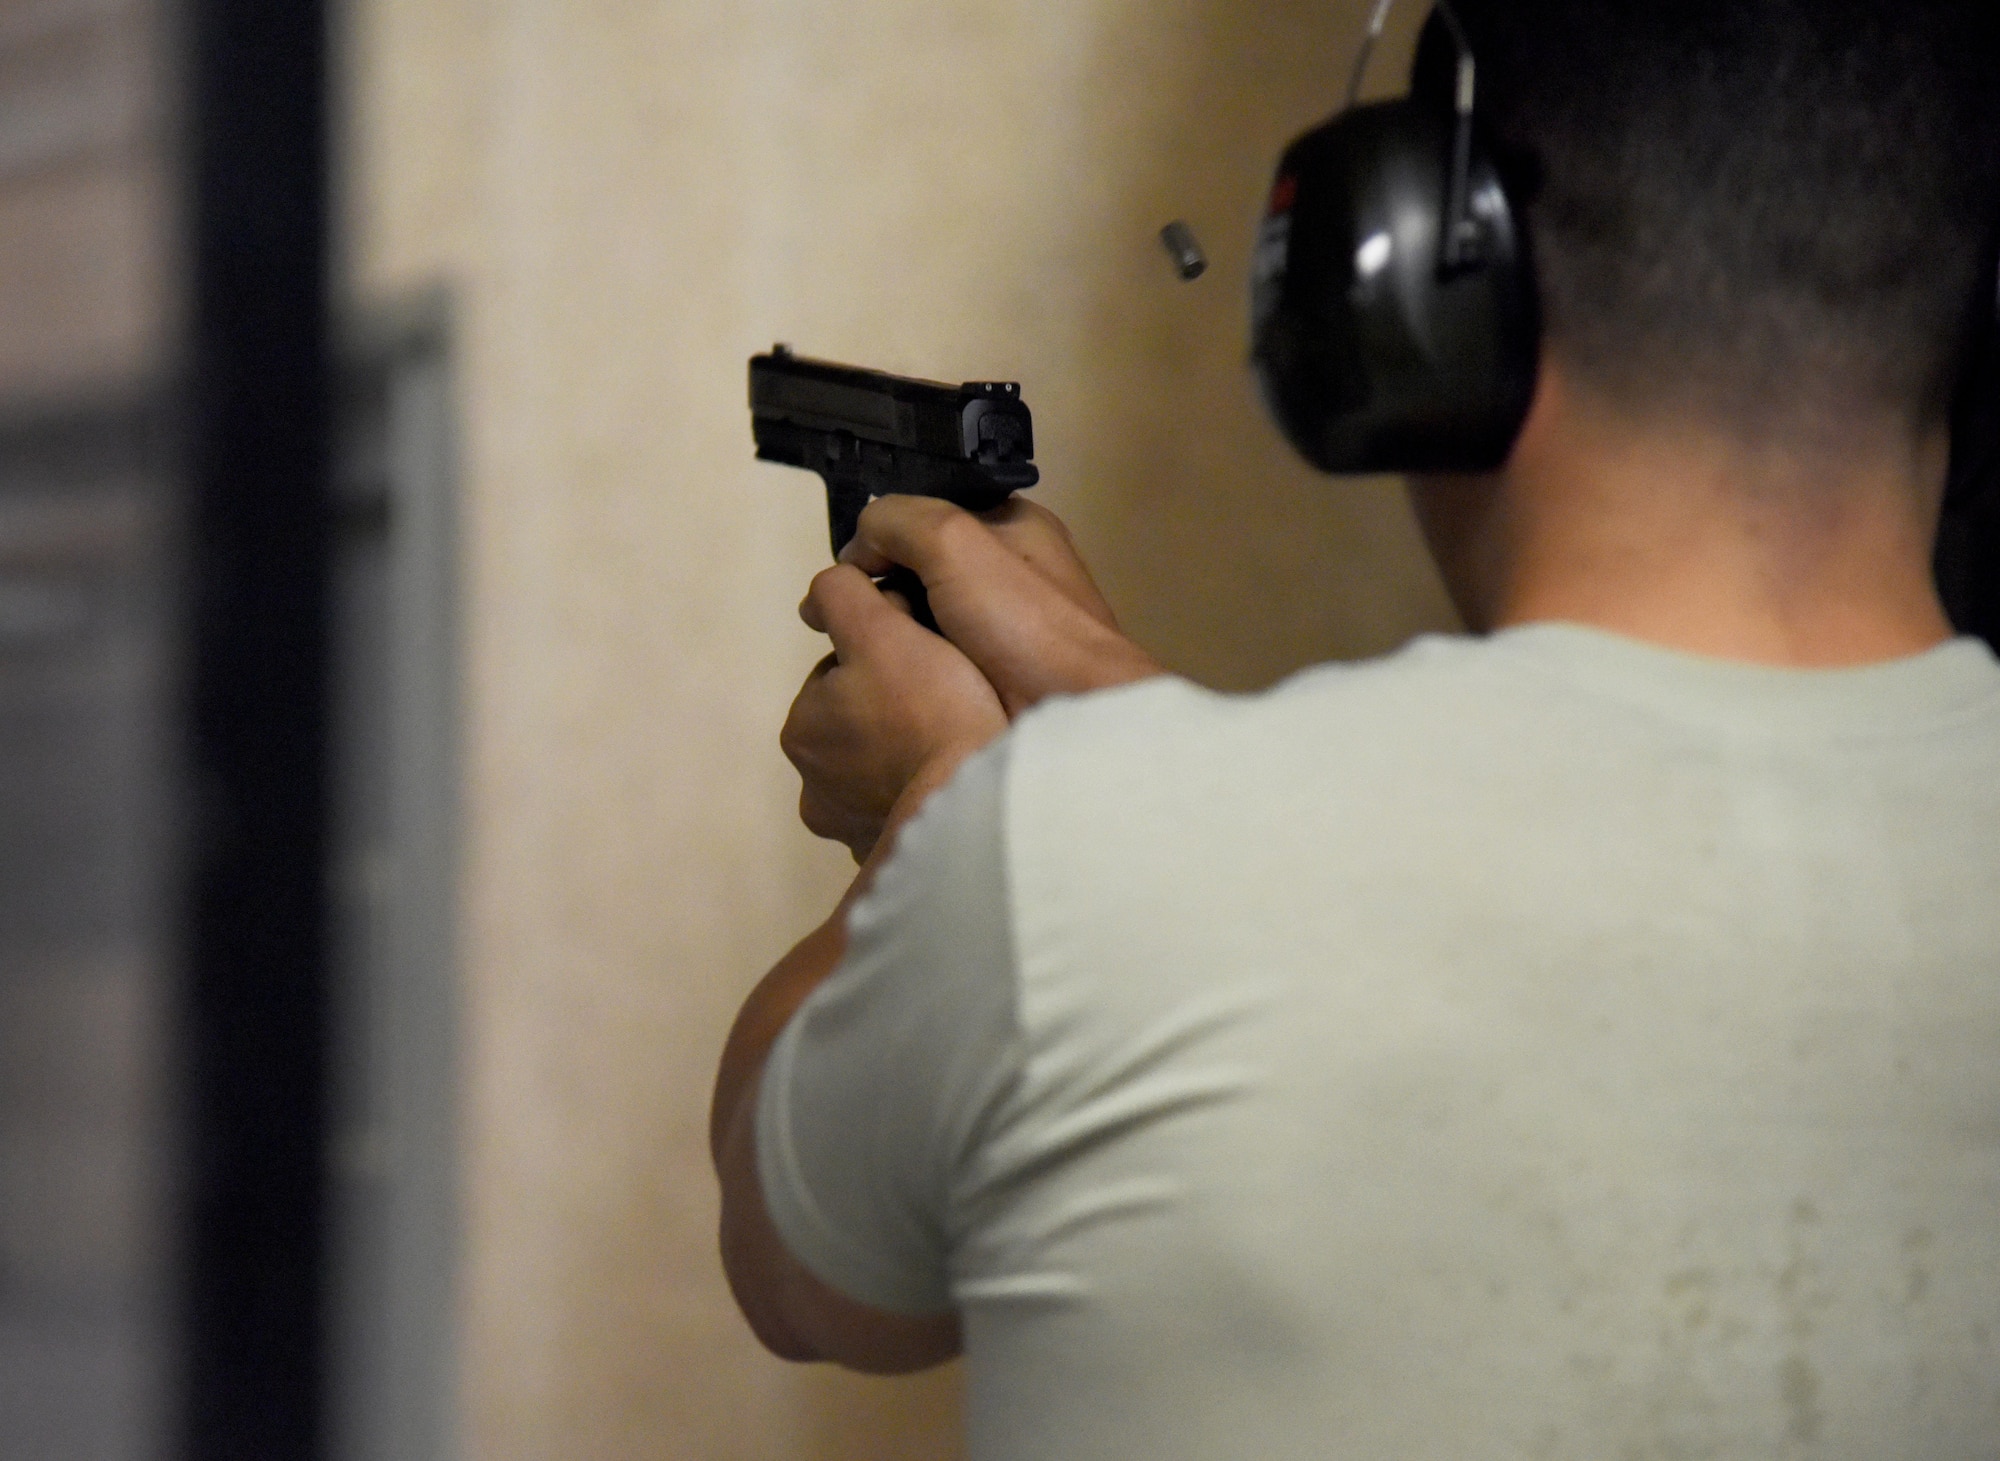 First Lt. Christian Torres, 2nd Air Force budget chief, fires his weapon during the 81st Security Forces Squadron open base pistol shoot at the indoor firing range May 15, 2017, on Keesler Air Force Base, Miss. The event was held during National Police Week, which recognizes the service of law enforcement men and women who put their lives at risk every day. (U.S. Air Force photo by Kemberly Groue)